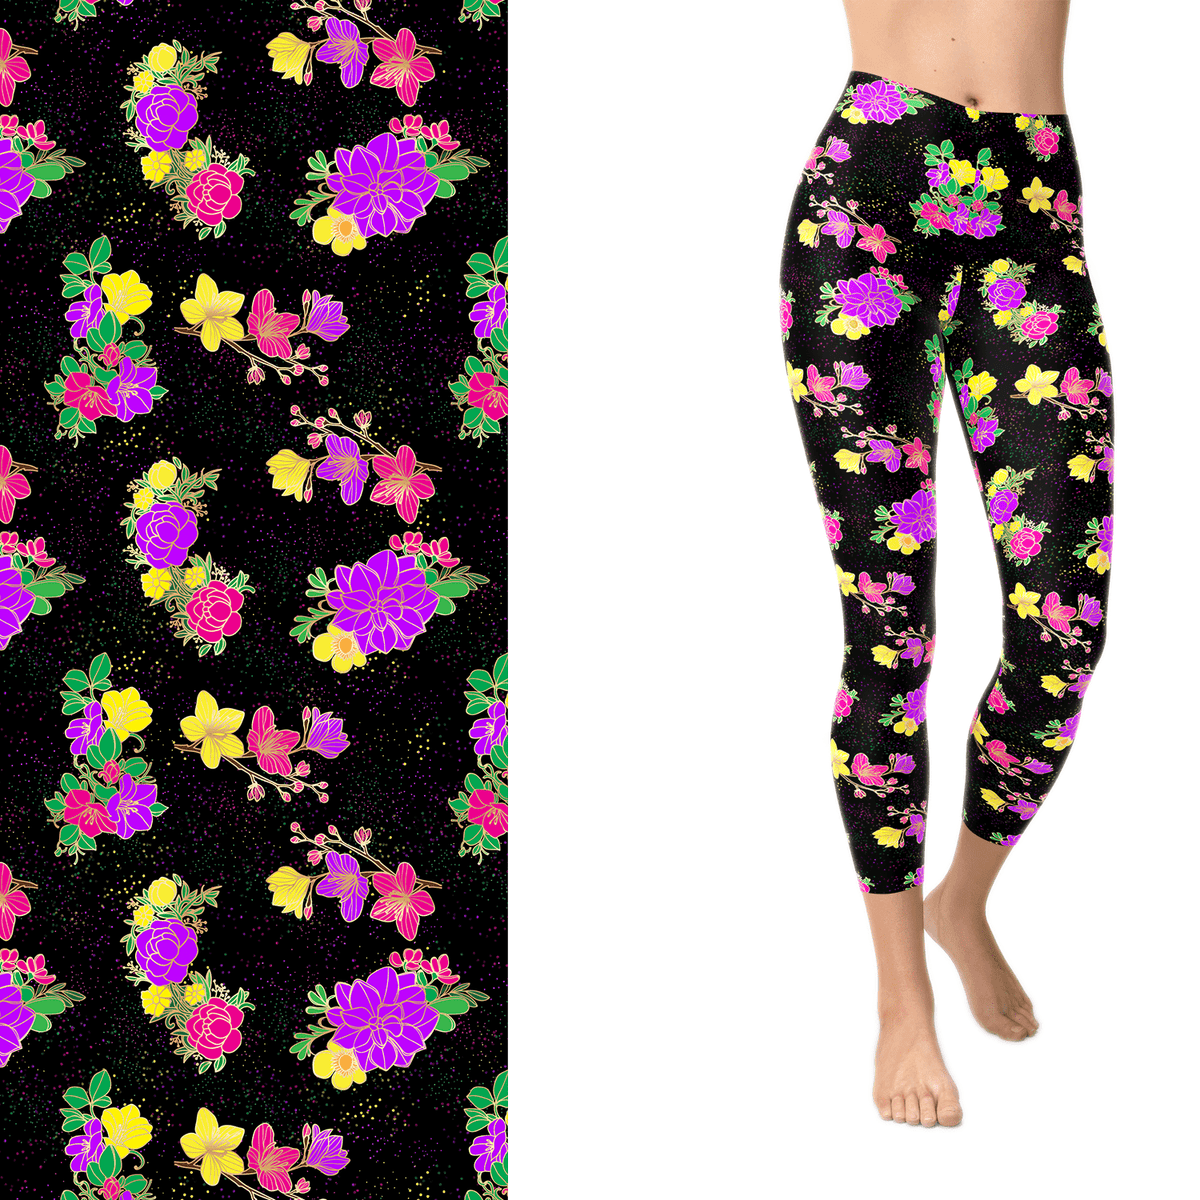 Neon Painted Flowers Full Length leggings with Pockets